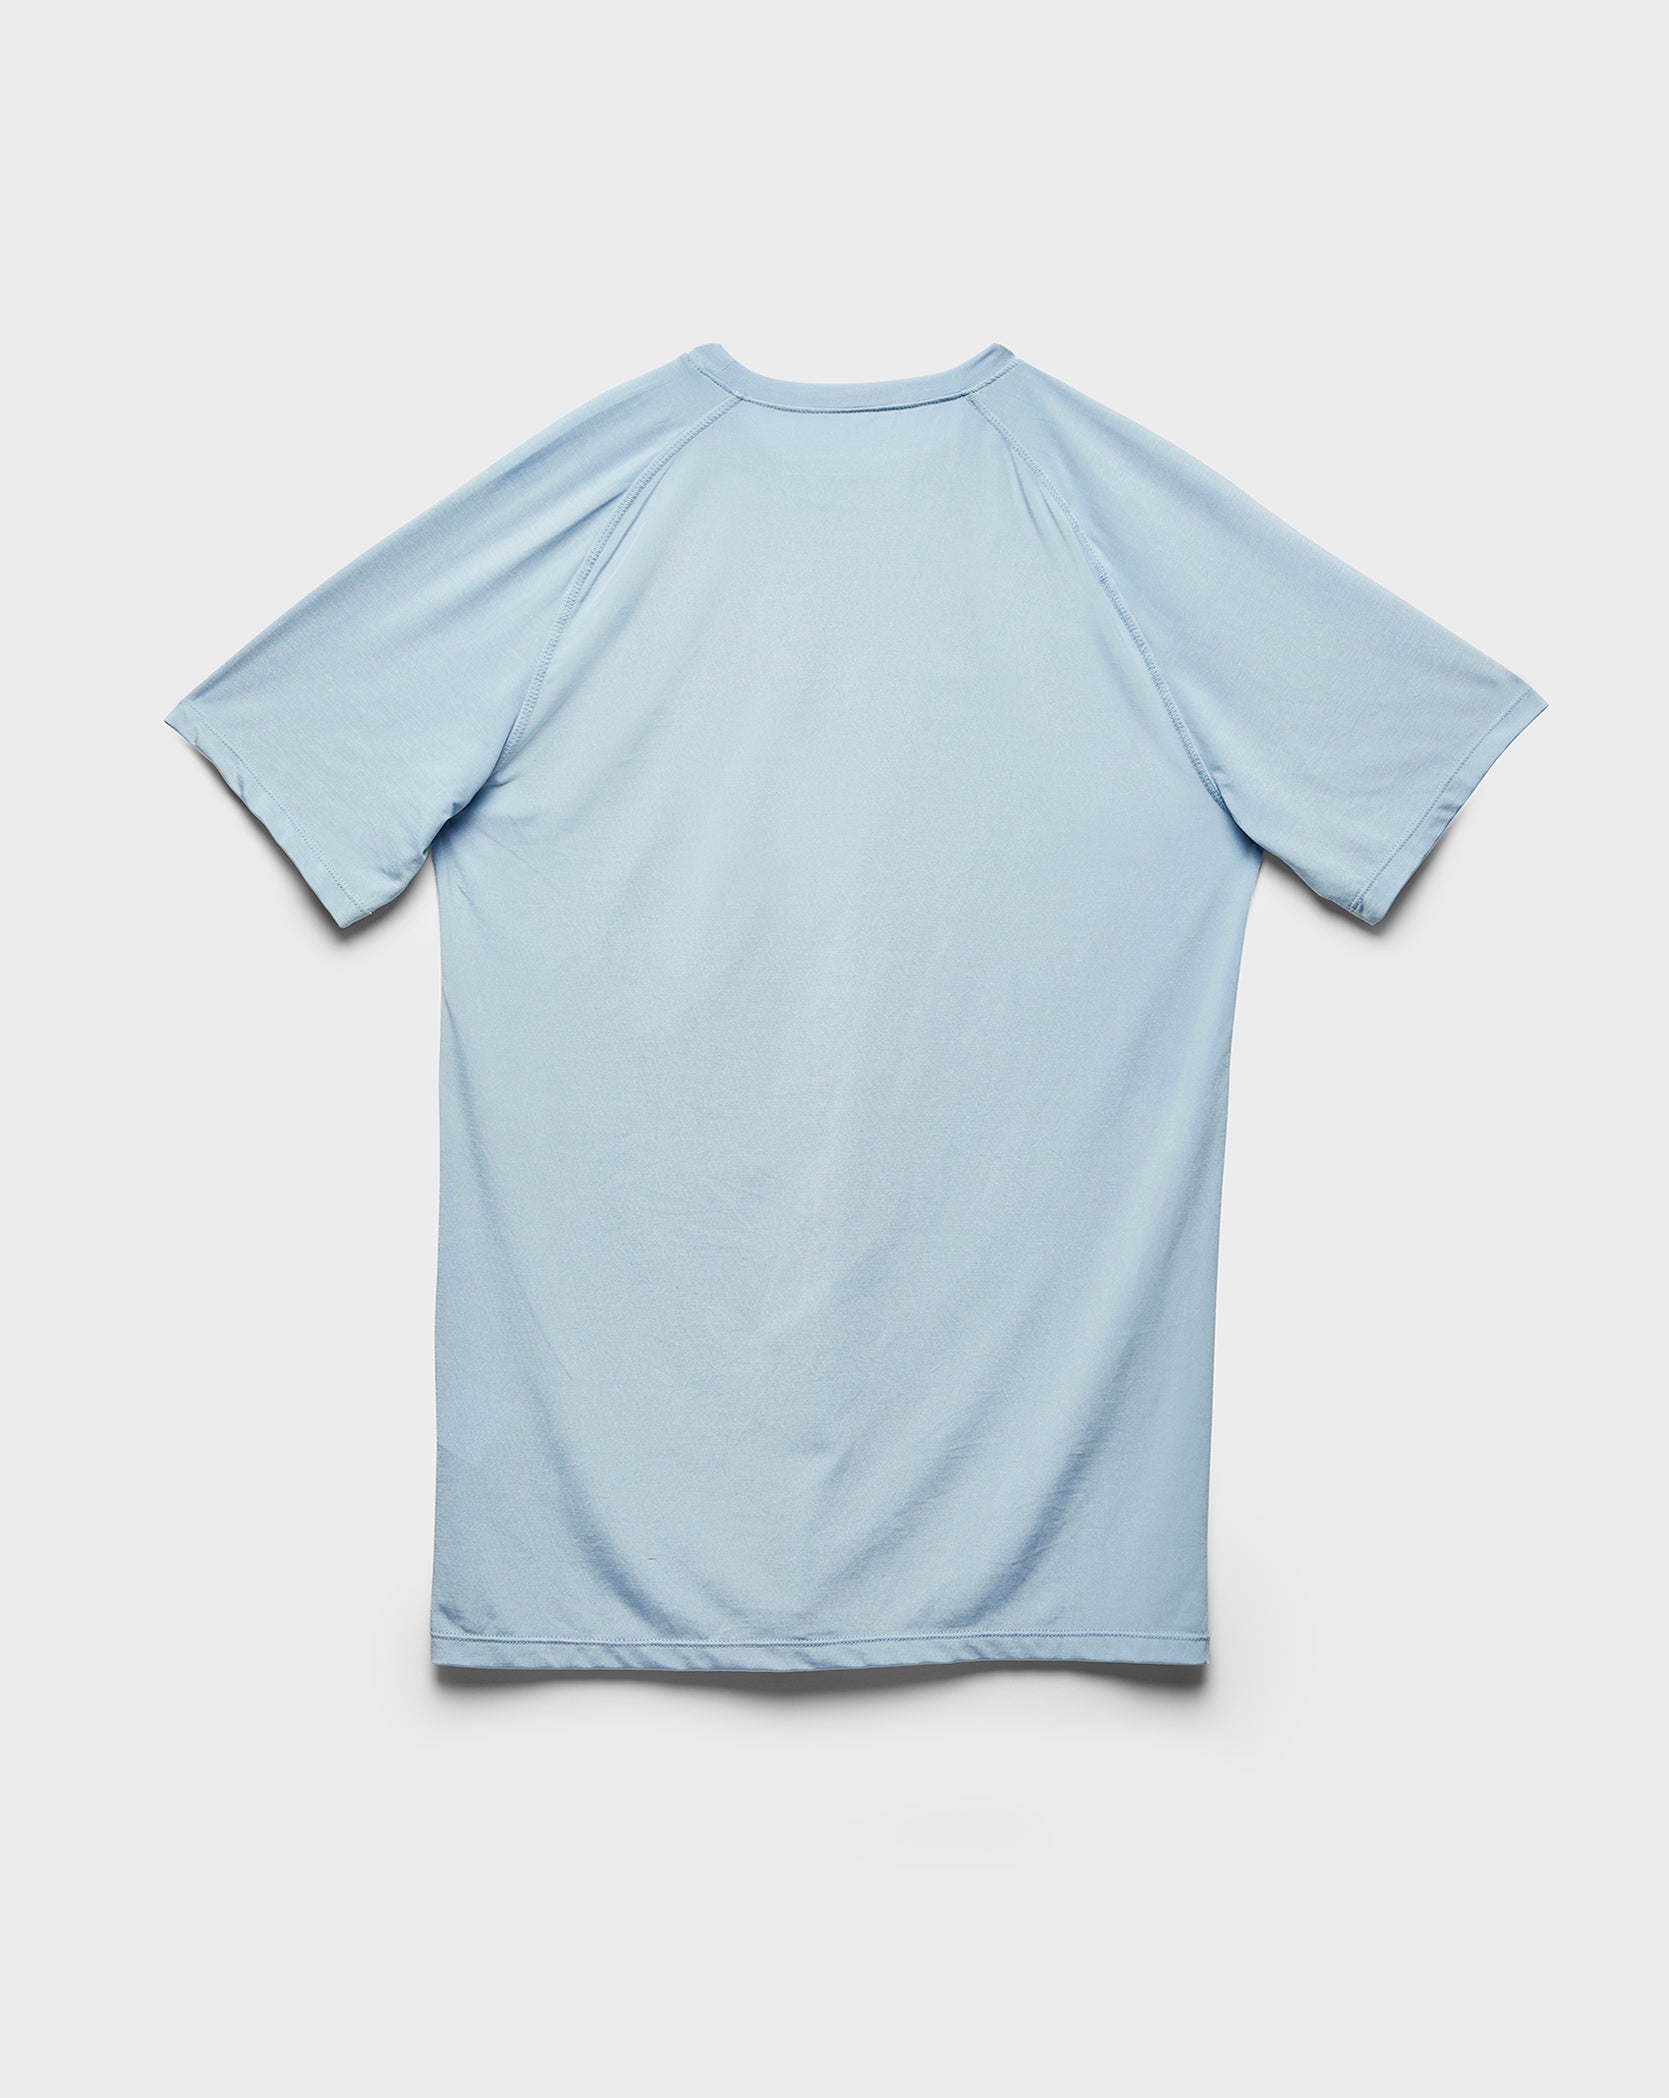 Twinzz active sky blue t-shirt back